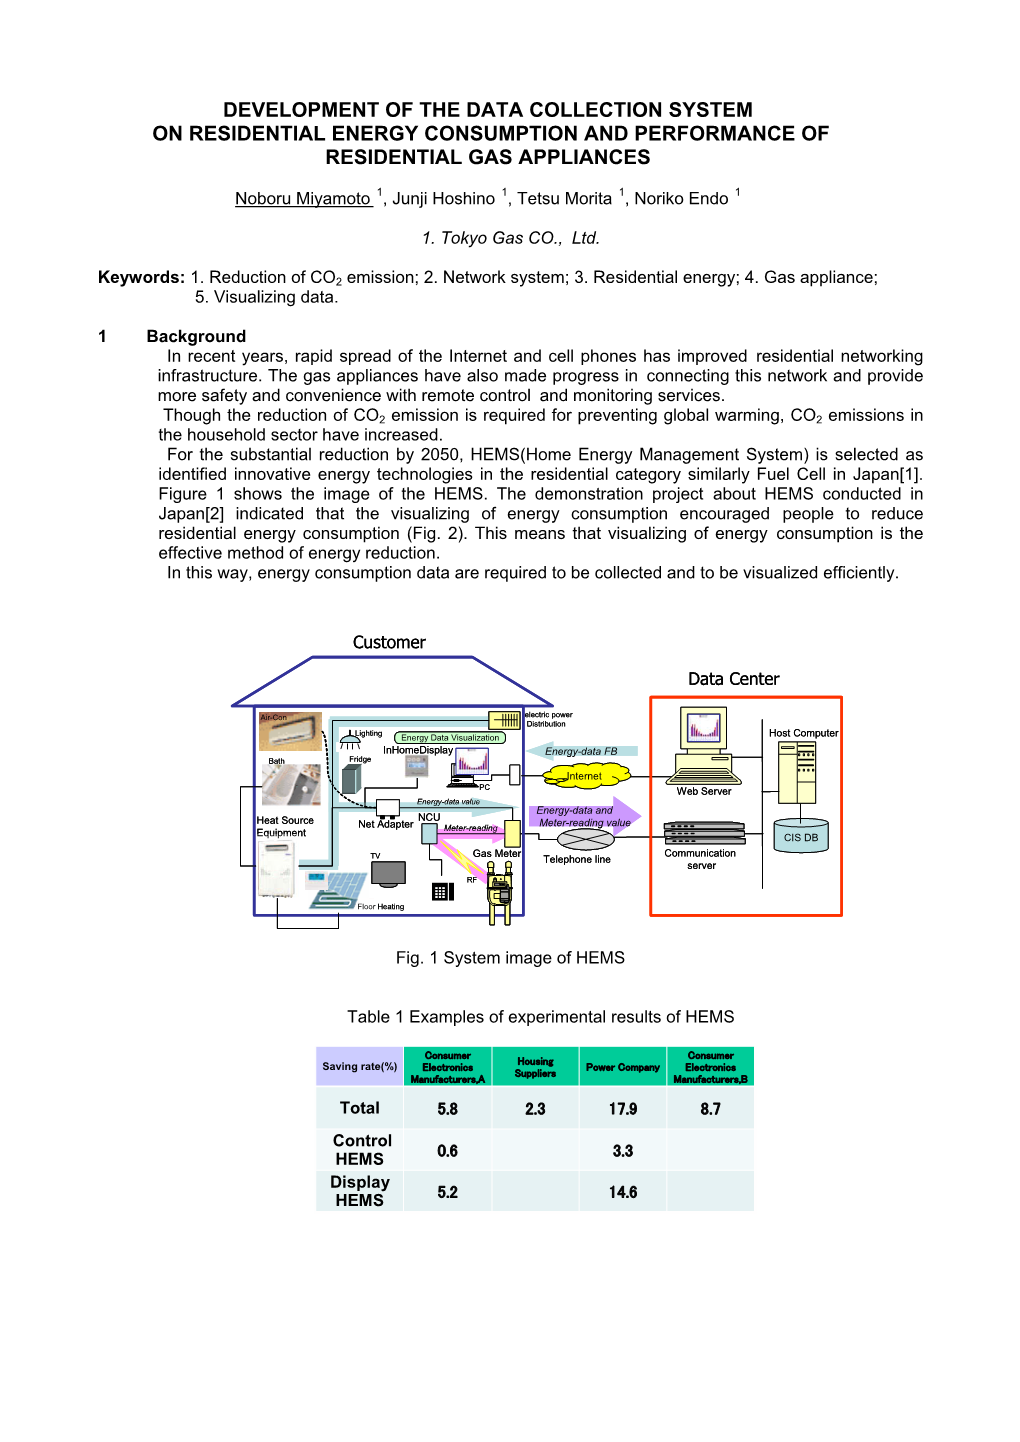 Development of the Data Collection System on Residential Energy Consumption and Performance of Residential Gas Appliances